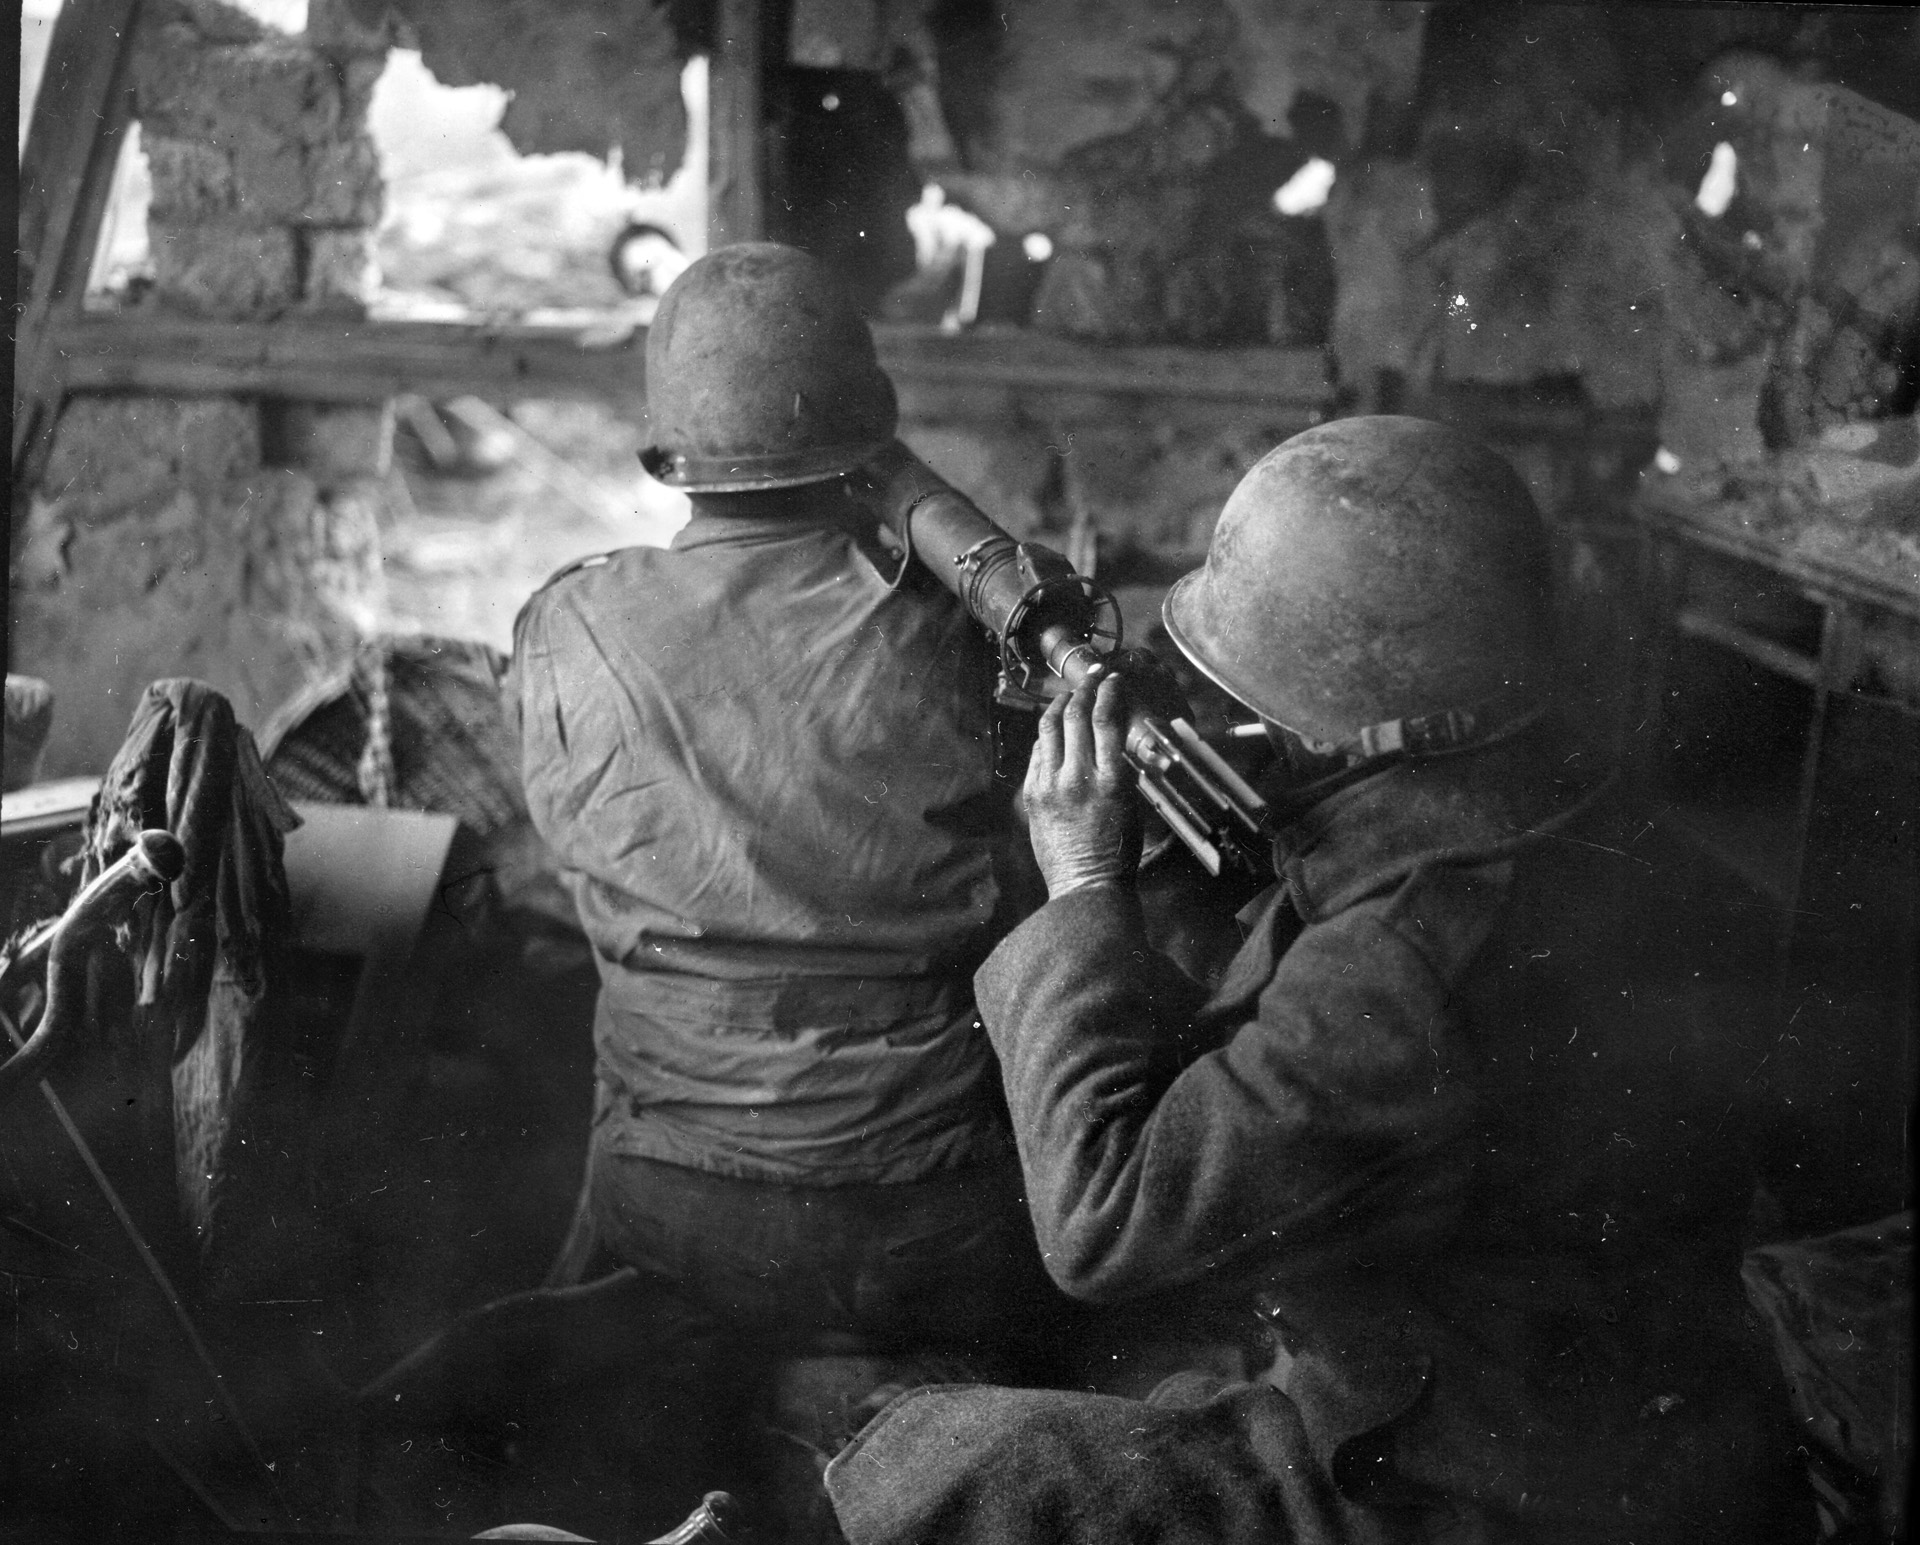 From their position inside a ruined house, two solders from the 4th Infantry Division’s 22nd Infantry Regiment fire on a German tank with a 3.5-inch rocket launcher, commonly called a “bazooka,” during the Battle of the Bulge, December 1944.